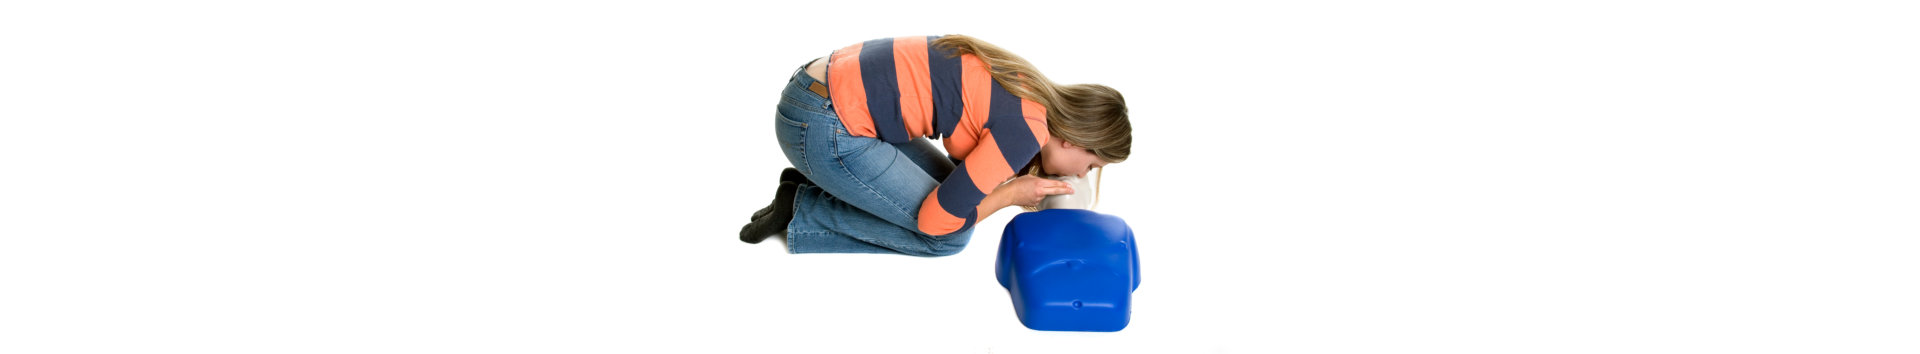 adult woman practicing cpr